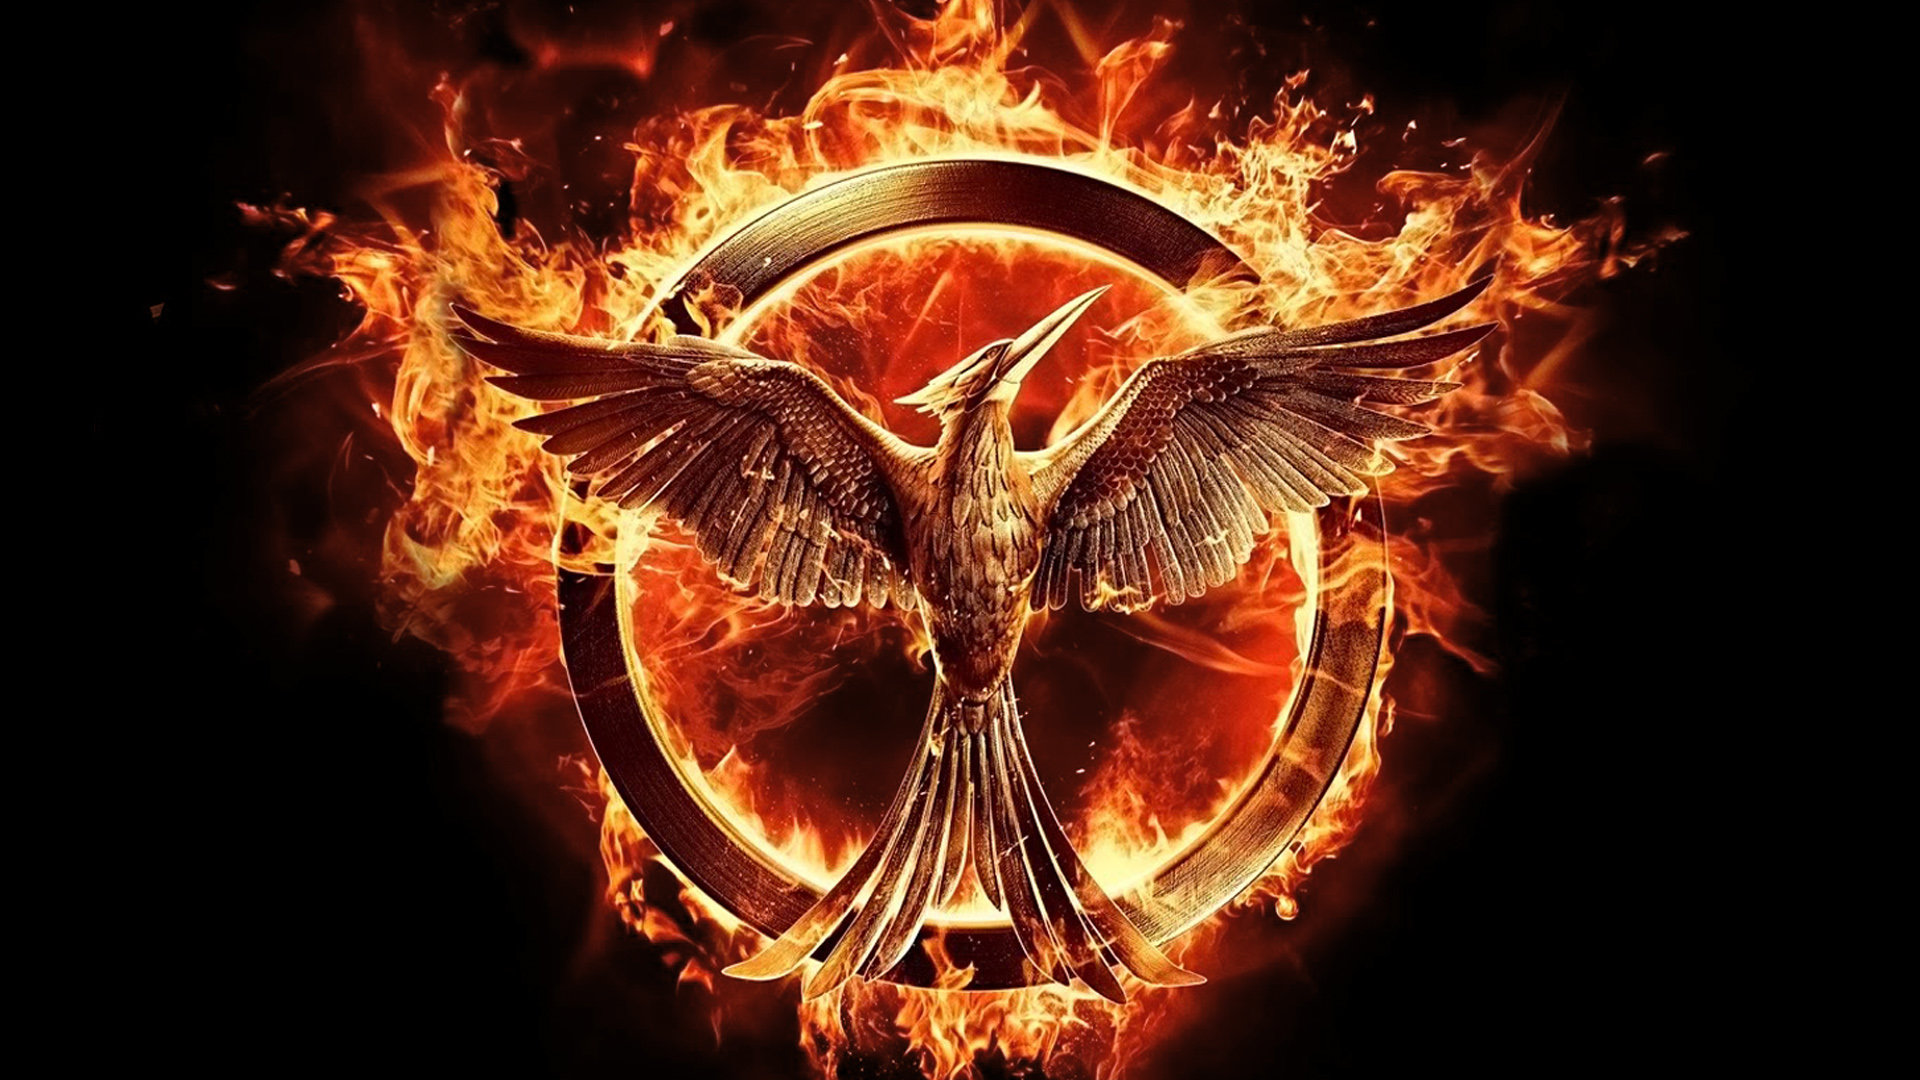 The Hunger Games Mockingjay   Part 1 wallpapers HD for desktop